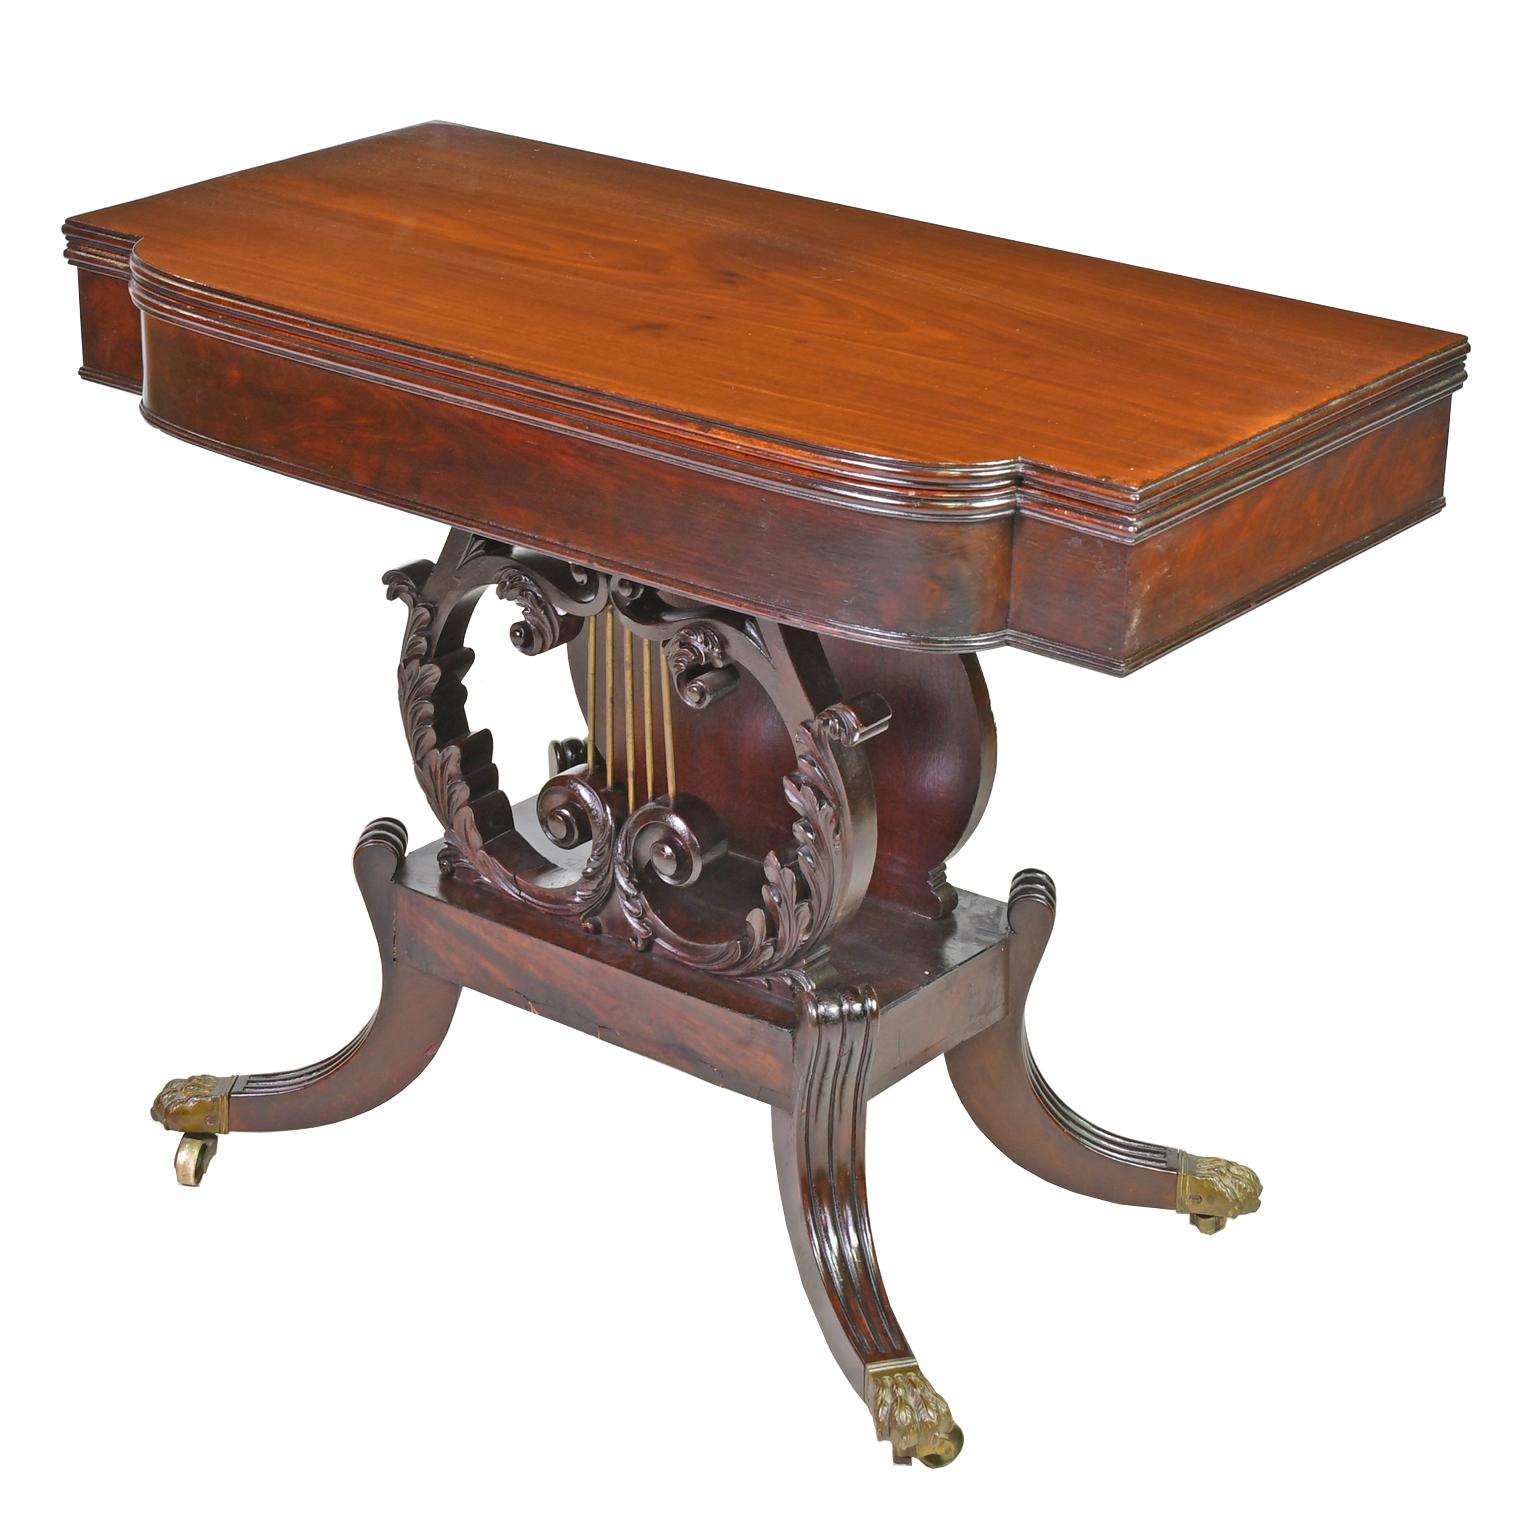 A very fine Federal card table attributable to renown Boston cabinetmaker, Thomas Seymour (1771-1848) with carvings likely by Thomas Wightman (1759-1827), Boston, circa 1815. The top is of solid mahogany; apron rails are supported by a solid